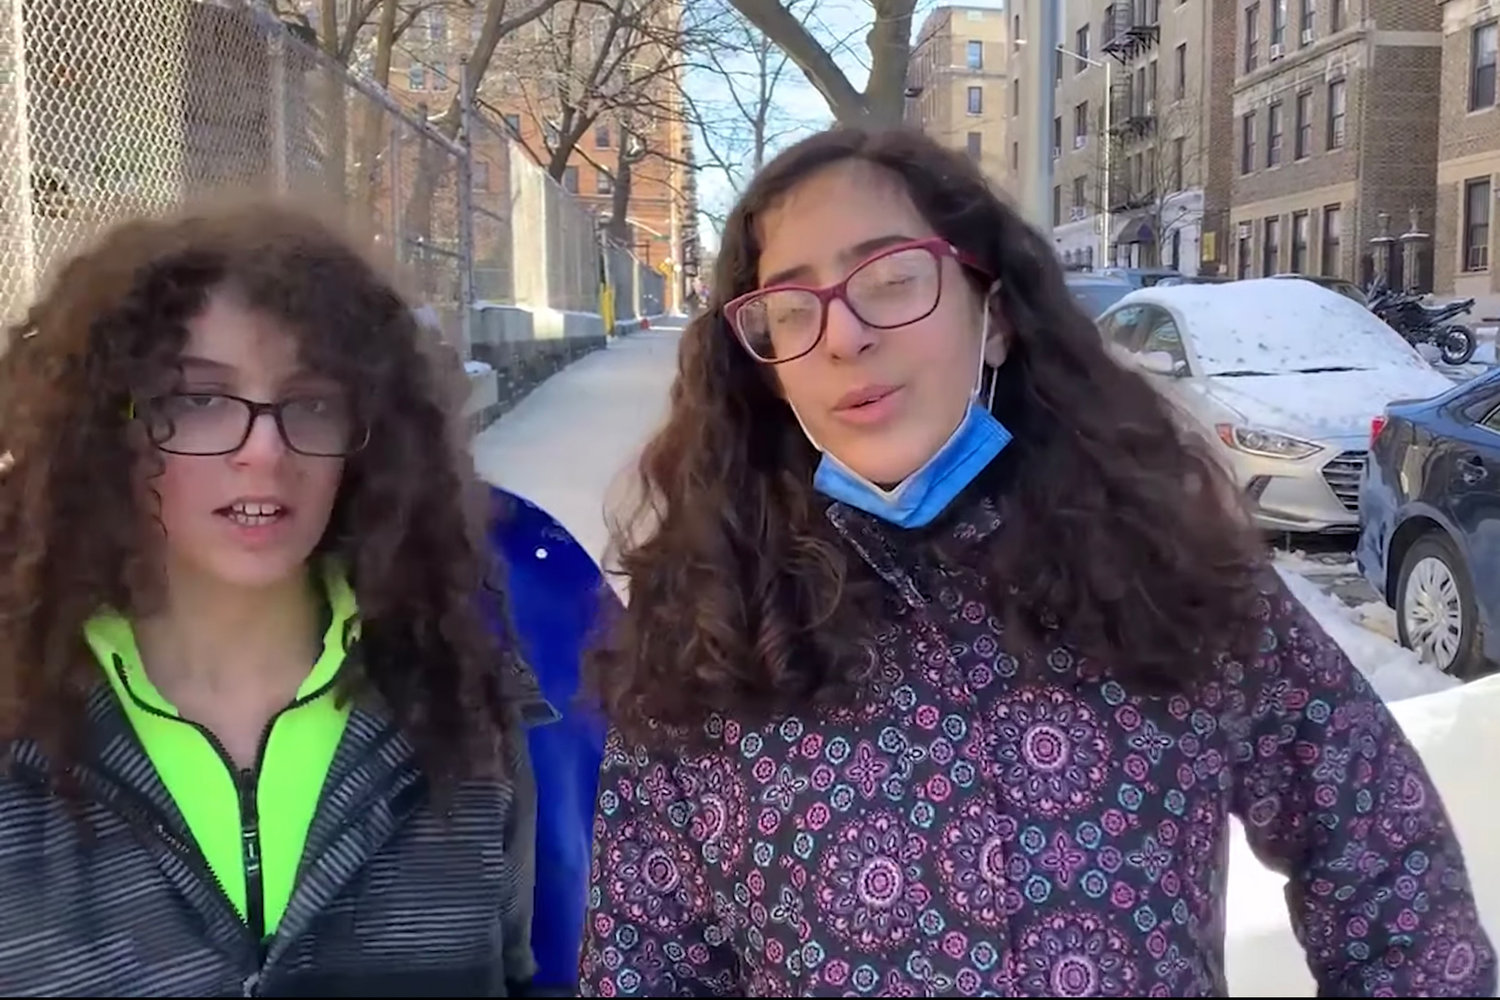 The Nasser siblings were featured personalities in a video called ‘Dog Poop,’ chronicling the omnipresent piles littering their route to go sledding in the snow. Filmed by father Nicola, ‘Dog Poop’ was one of 32 videos featured in the third annual New York City Public School Film Festival.